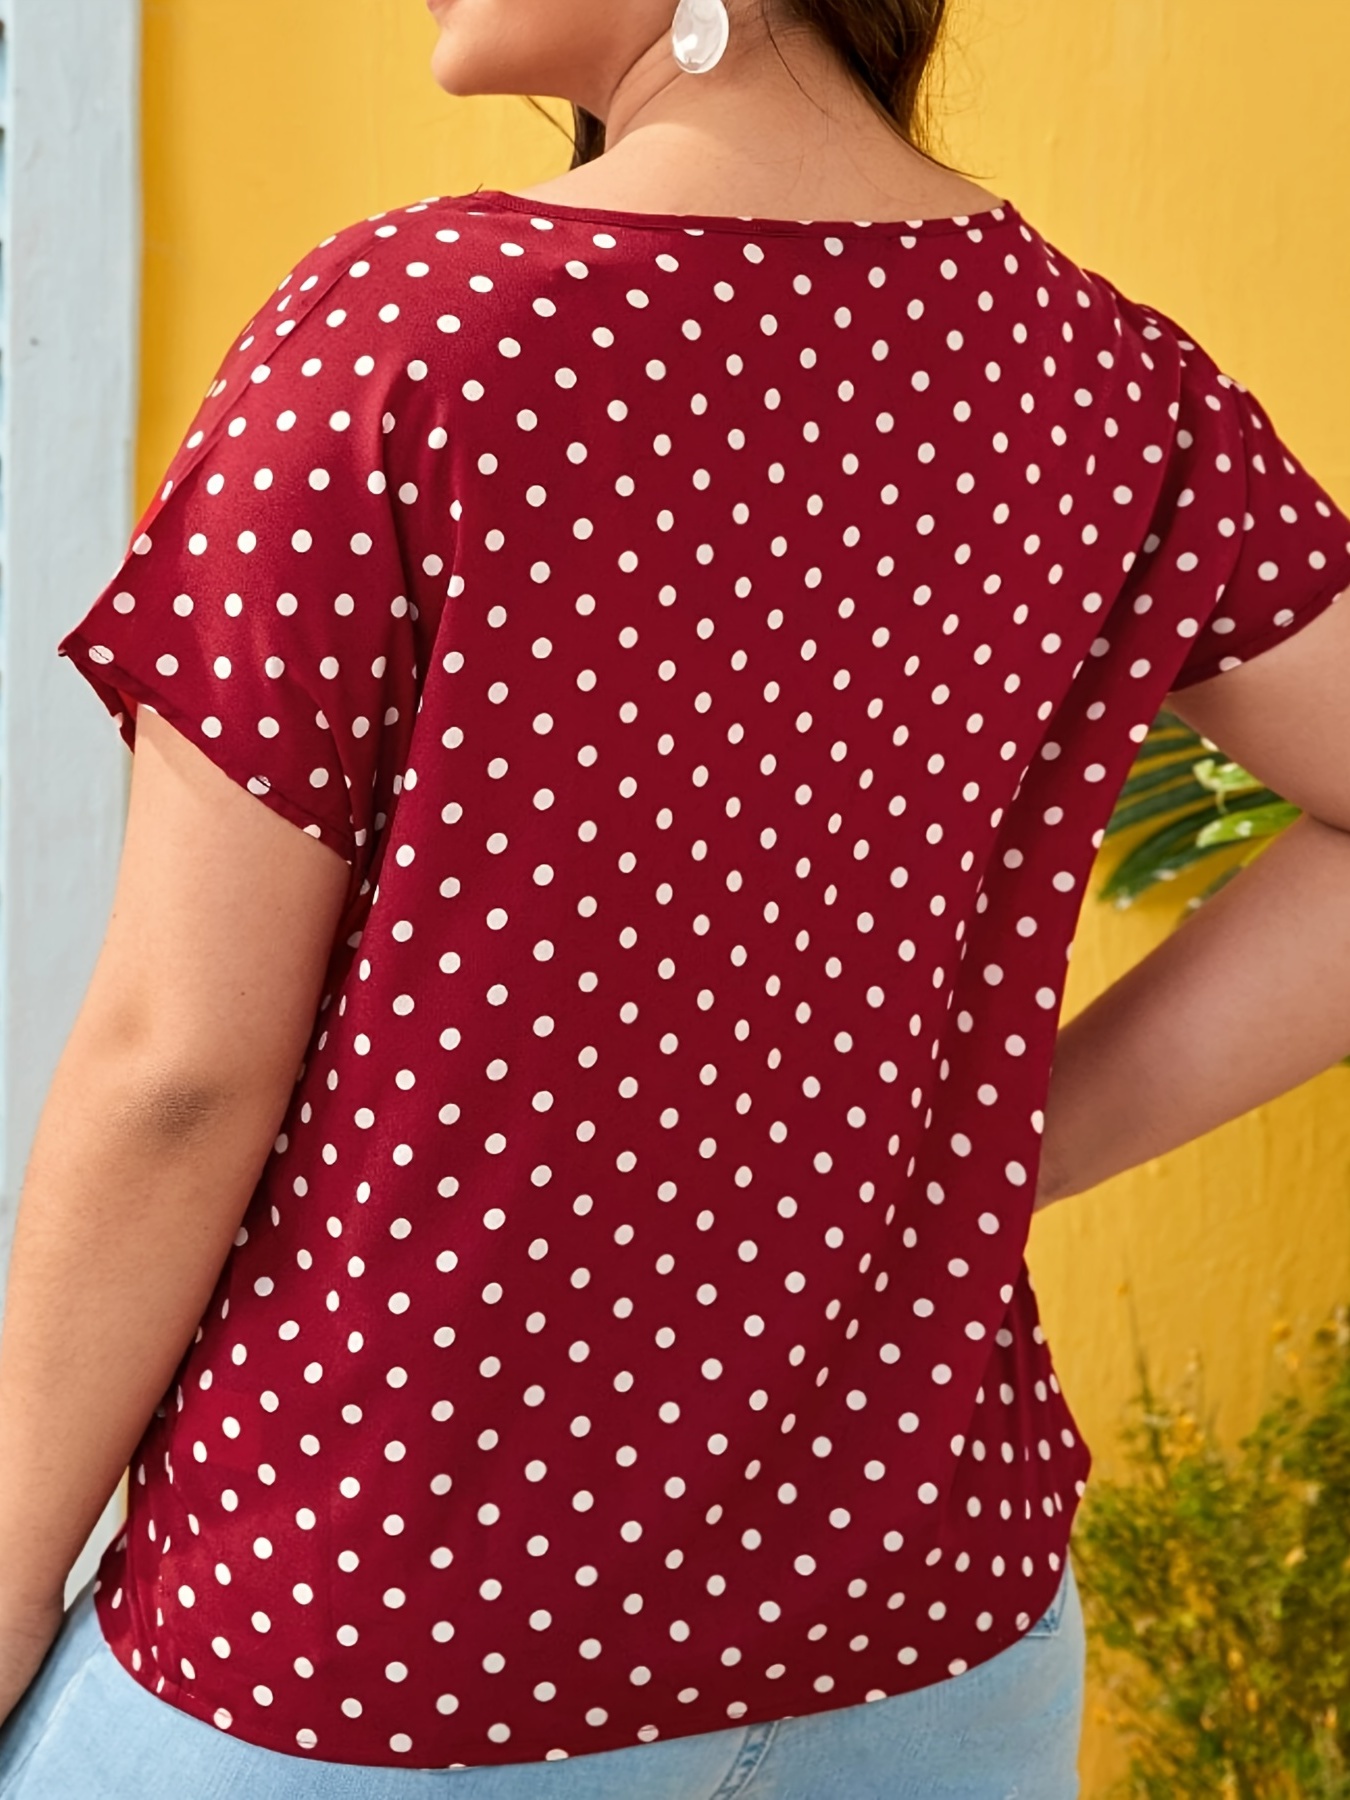 Red Polka Dot Cut Out Blouse